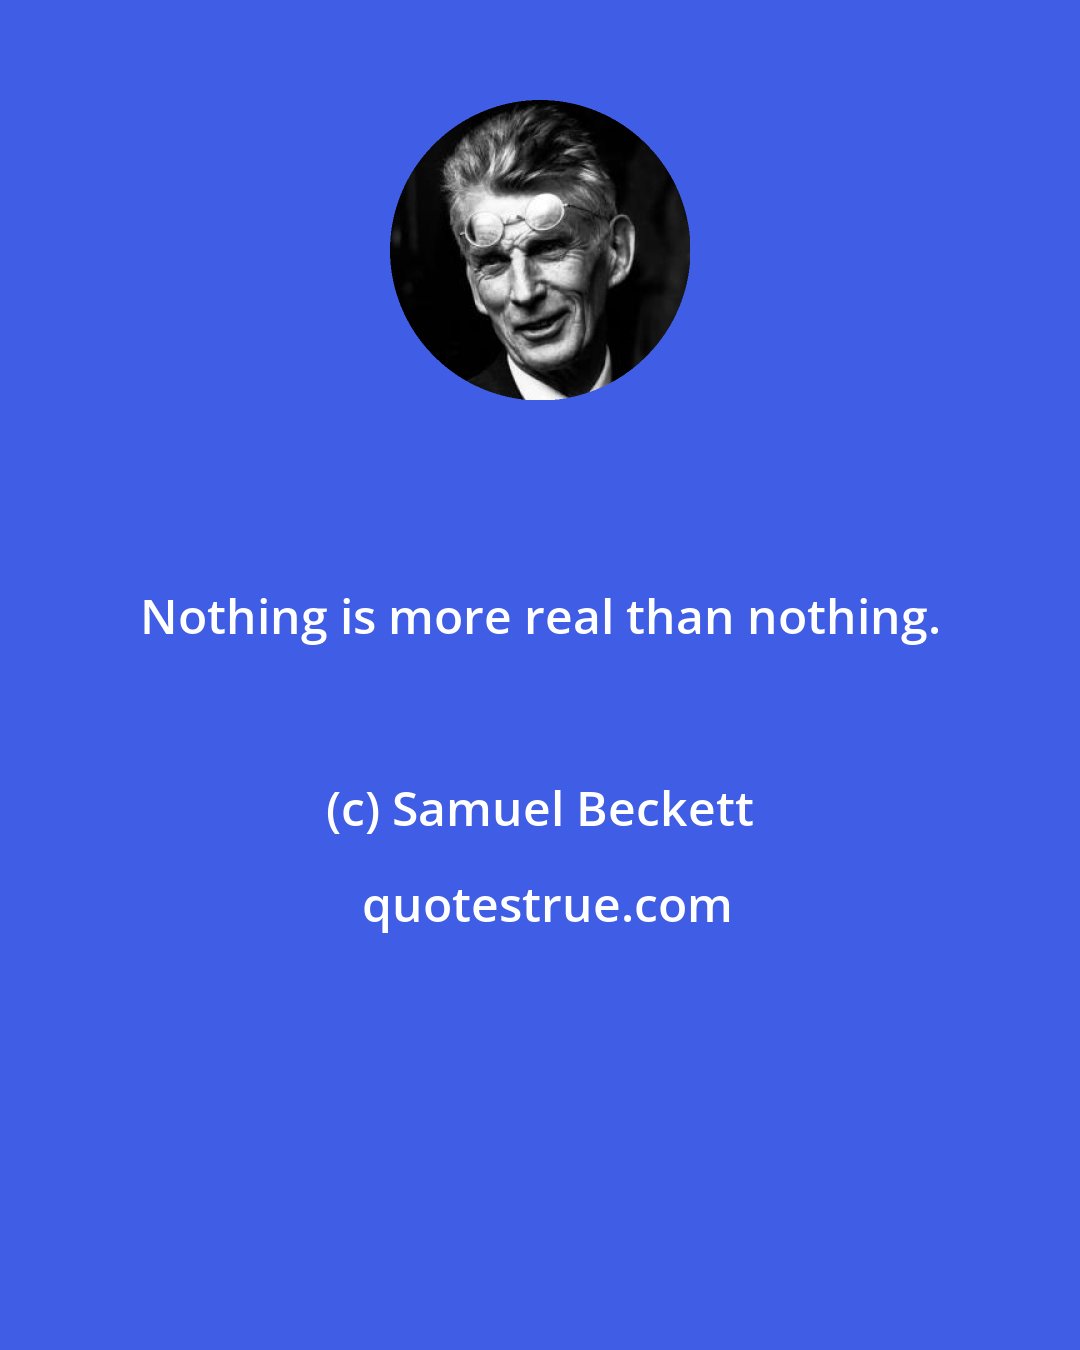 Samuel Beckett: Nothing is more real than nothing.